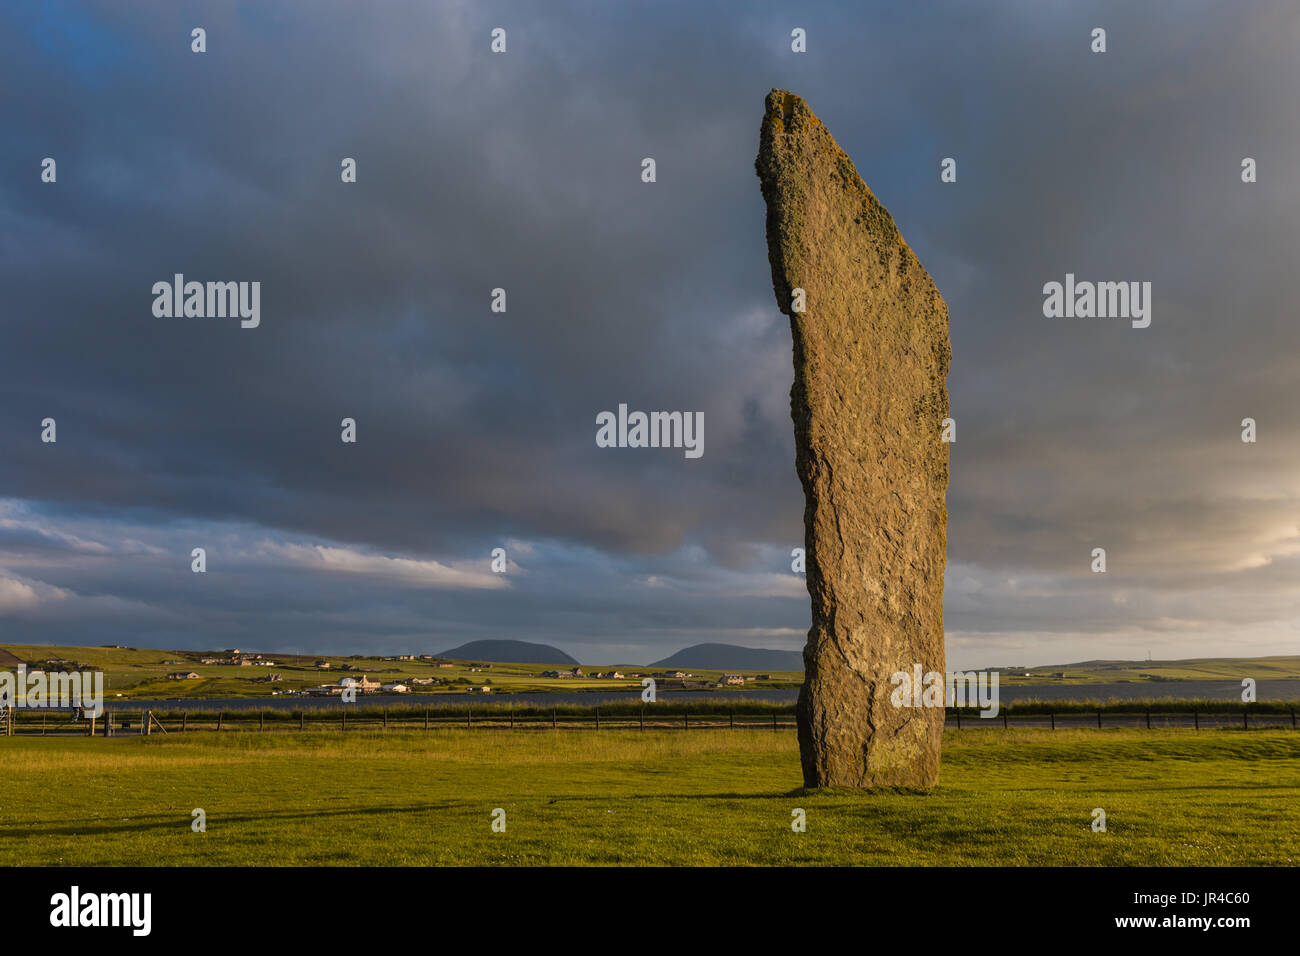 The Standing Stones of Stenness, Orkney at sunset afternoon evening light Stock Photo